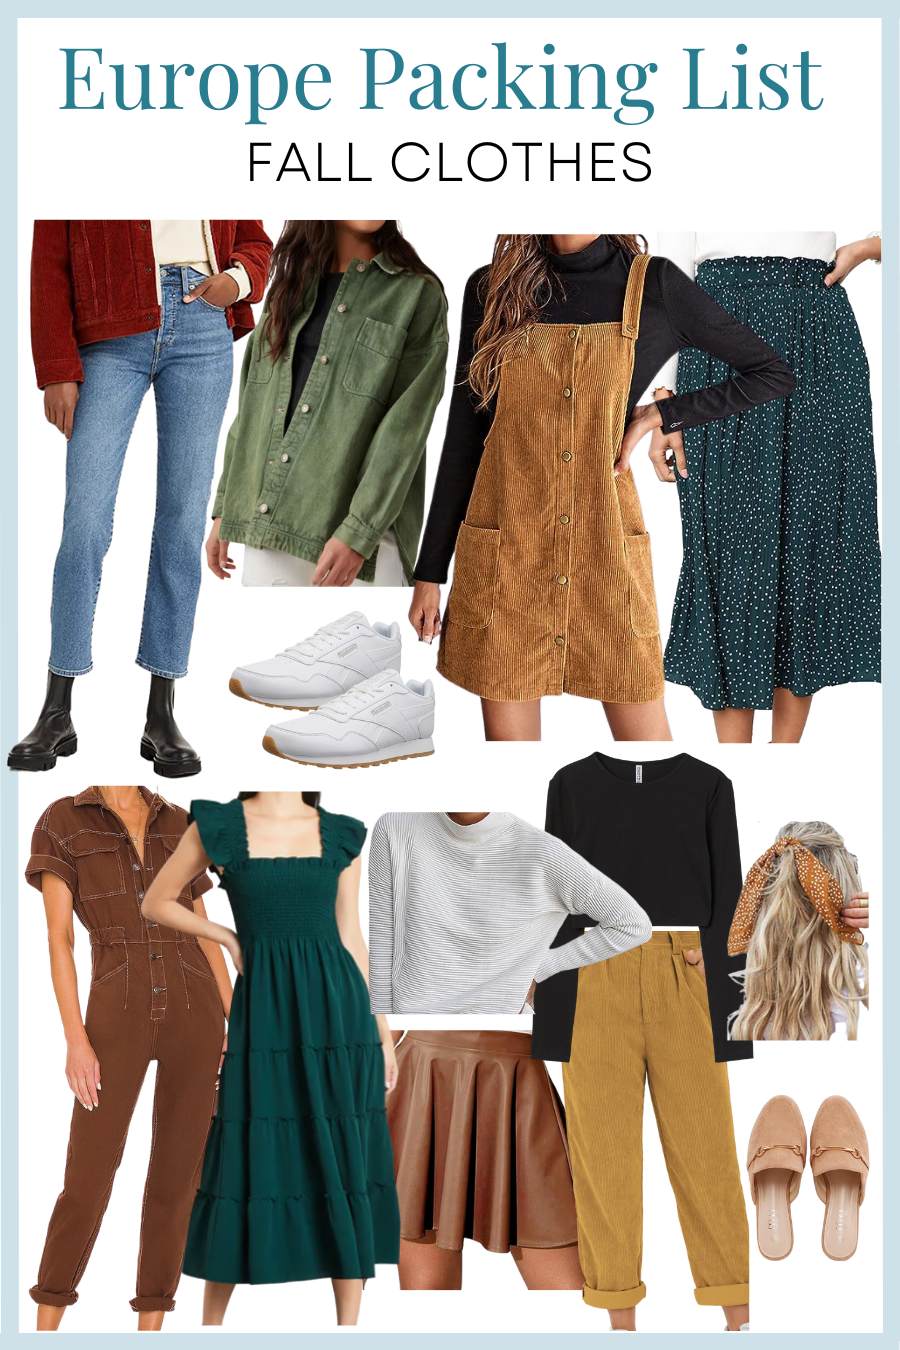 Fall in Europe packing list clothes